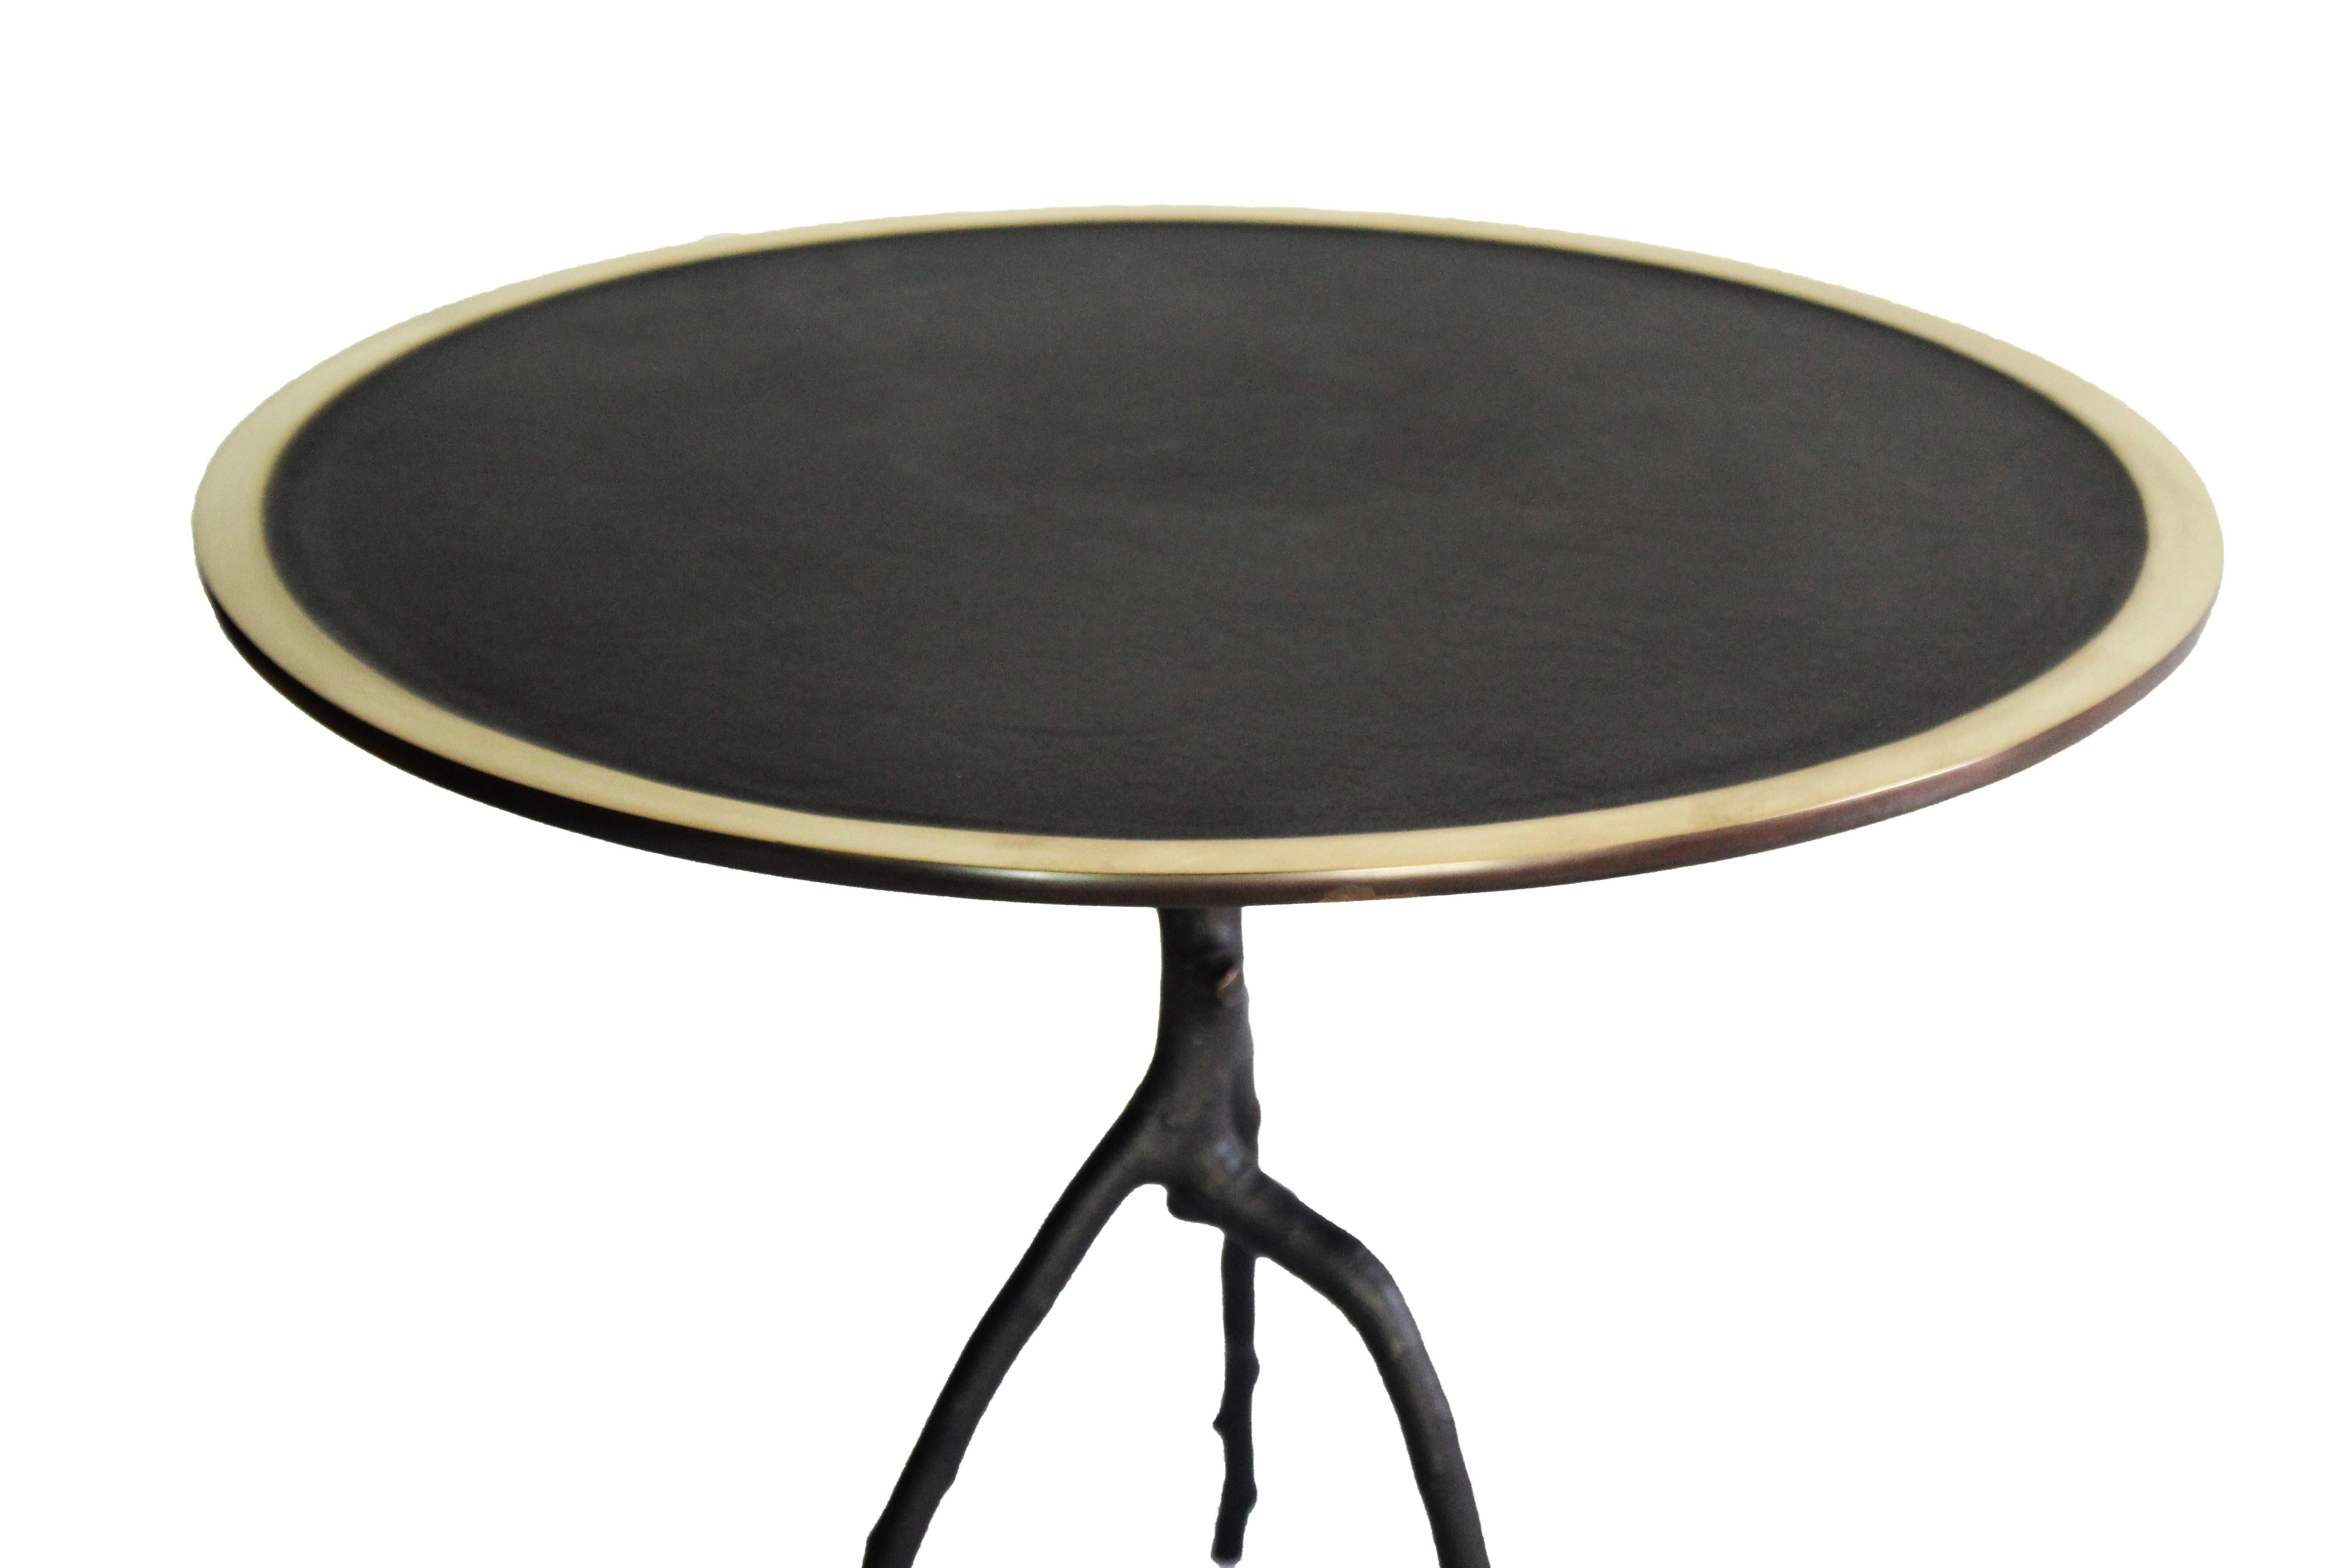 This handcrafted low table is made in France. With a apple tree branch as leg and a round tray with a polished contour, this side table is patined in black. Each table is signed and numbered. This side table belongs to the Bronze Sauvage collection